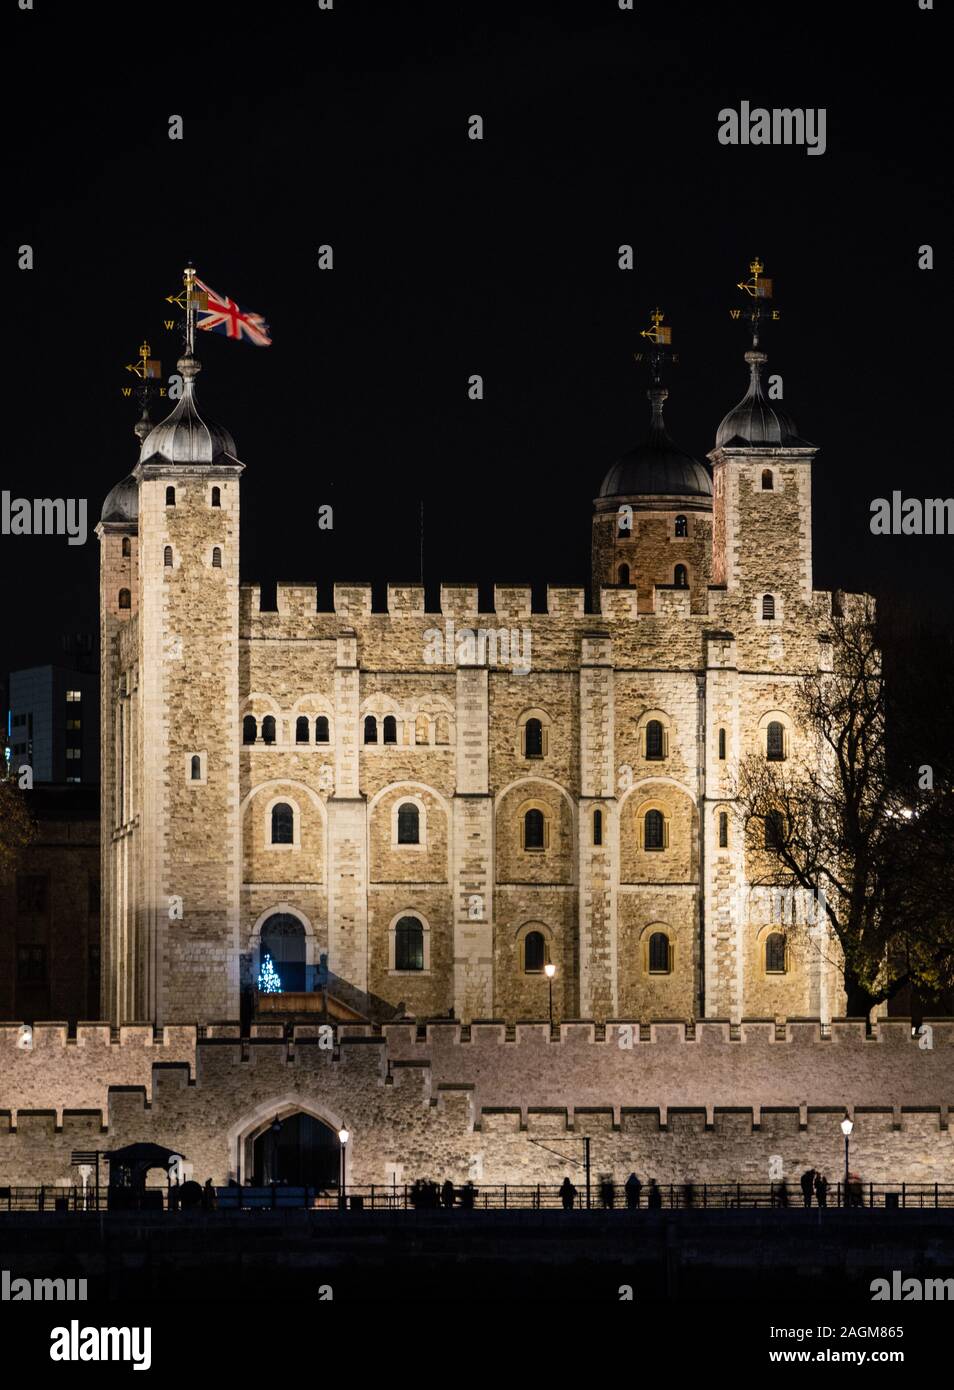 Tourists Outside The White Tower, Night Time, Tower of London, River Thames, City of London, England, UK, GB. Stock Photo